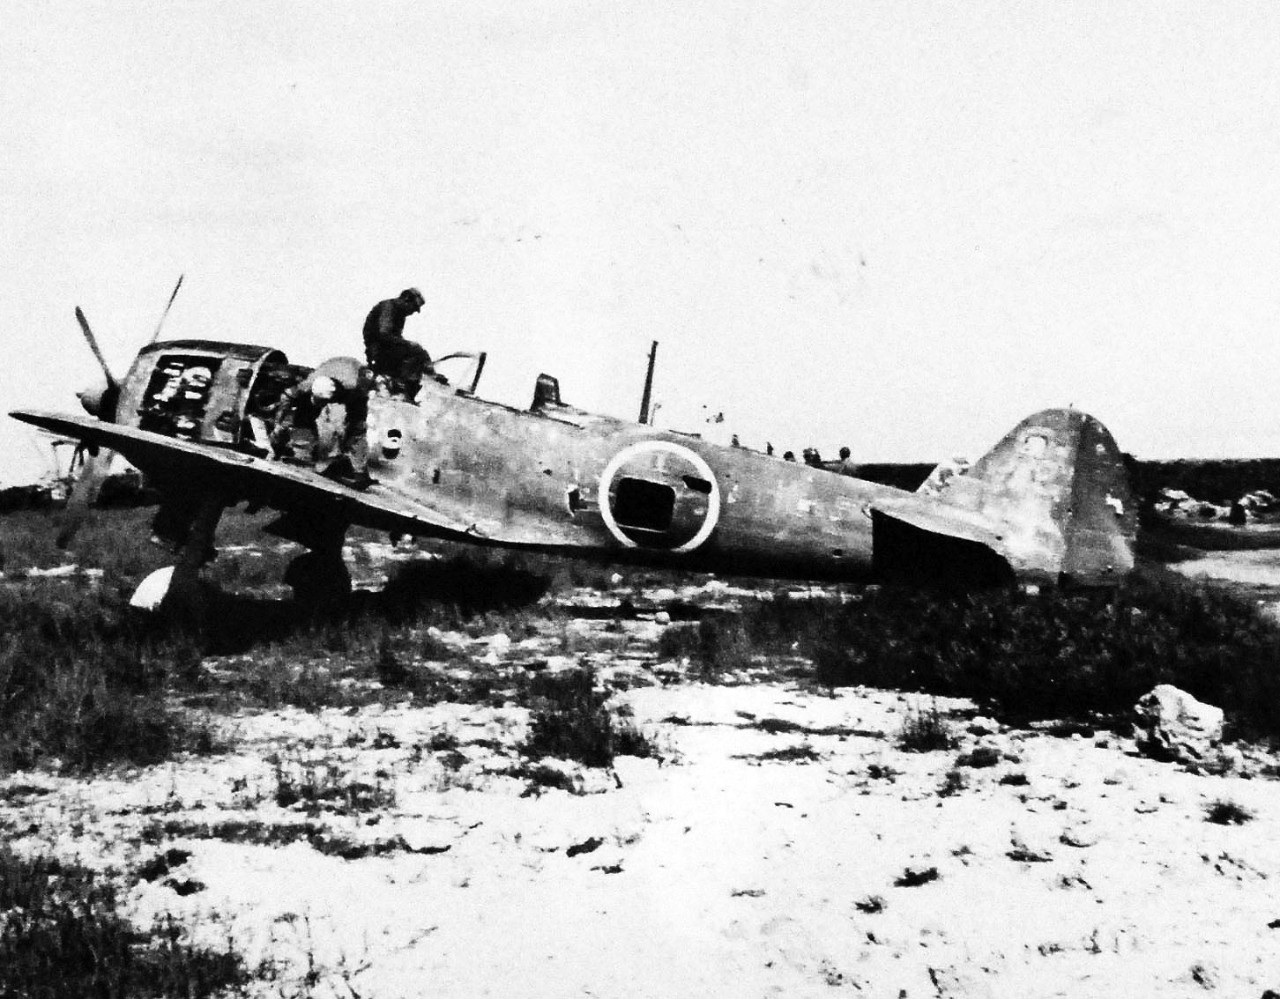 80-G-325333:  Okinawa Campaign, April-June 1945.  Group of smashed Japanese aircraft in the revetments of the airstrip at Naha, Okinawa, Ryukyu Islands.  This specific aircraft is a “Tony”.     This specific aircraft is a Kawasaki K-61, nicknamed “Tony”.     Photograph received 6 July 1945.  Official U.S. Navy Photograph, now in the collections of the National Archives.   (2014/5/1). 